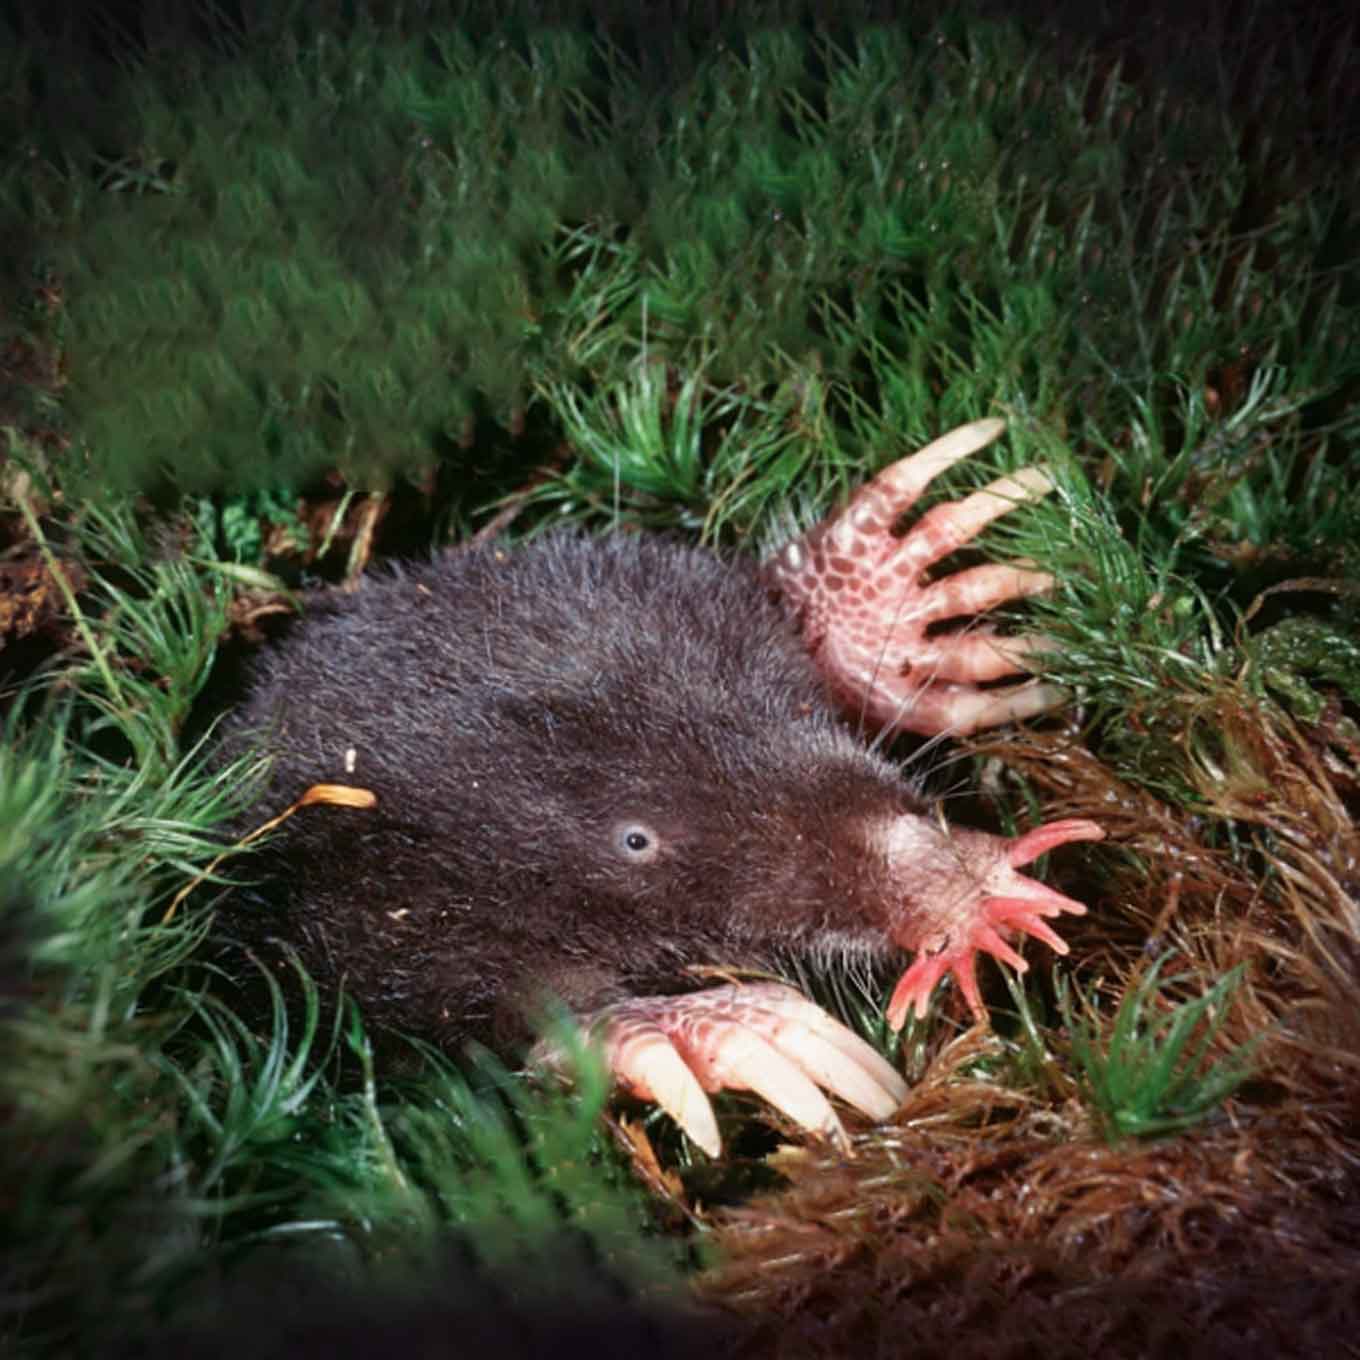 Star-nosed mole at night